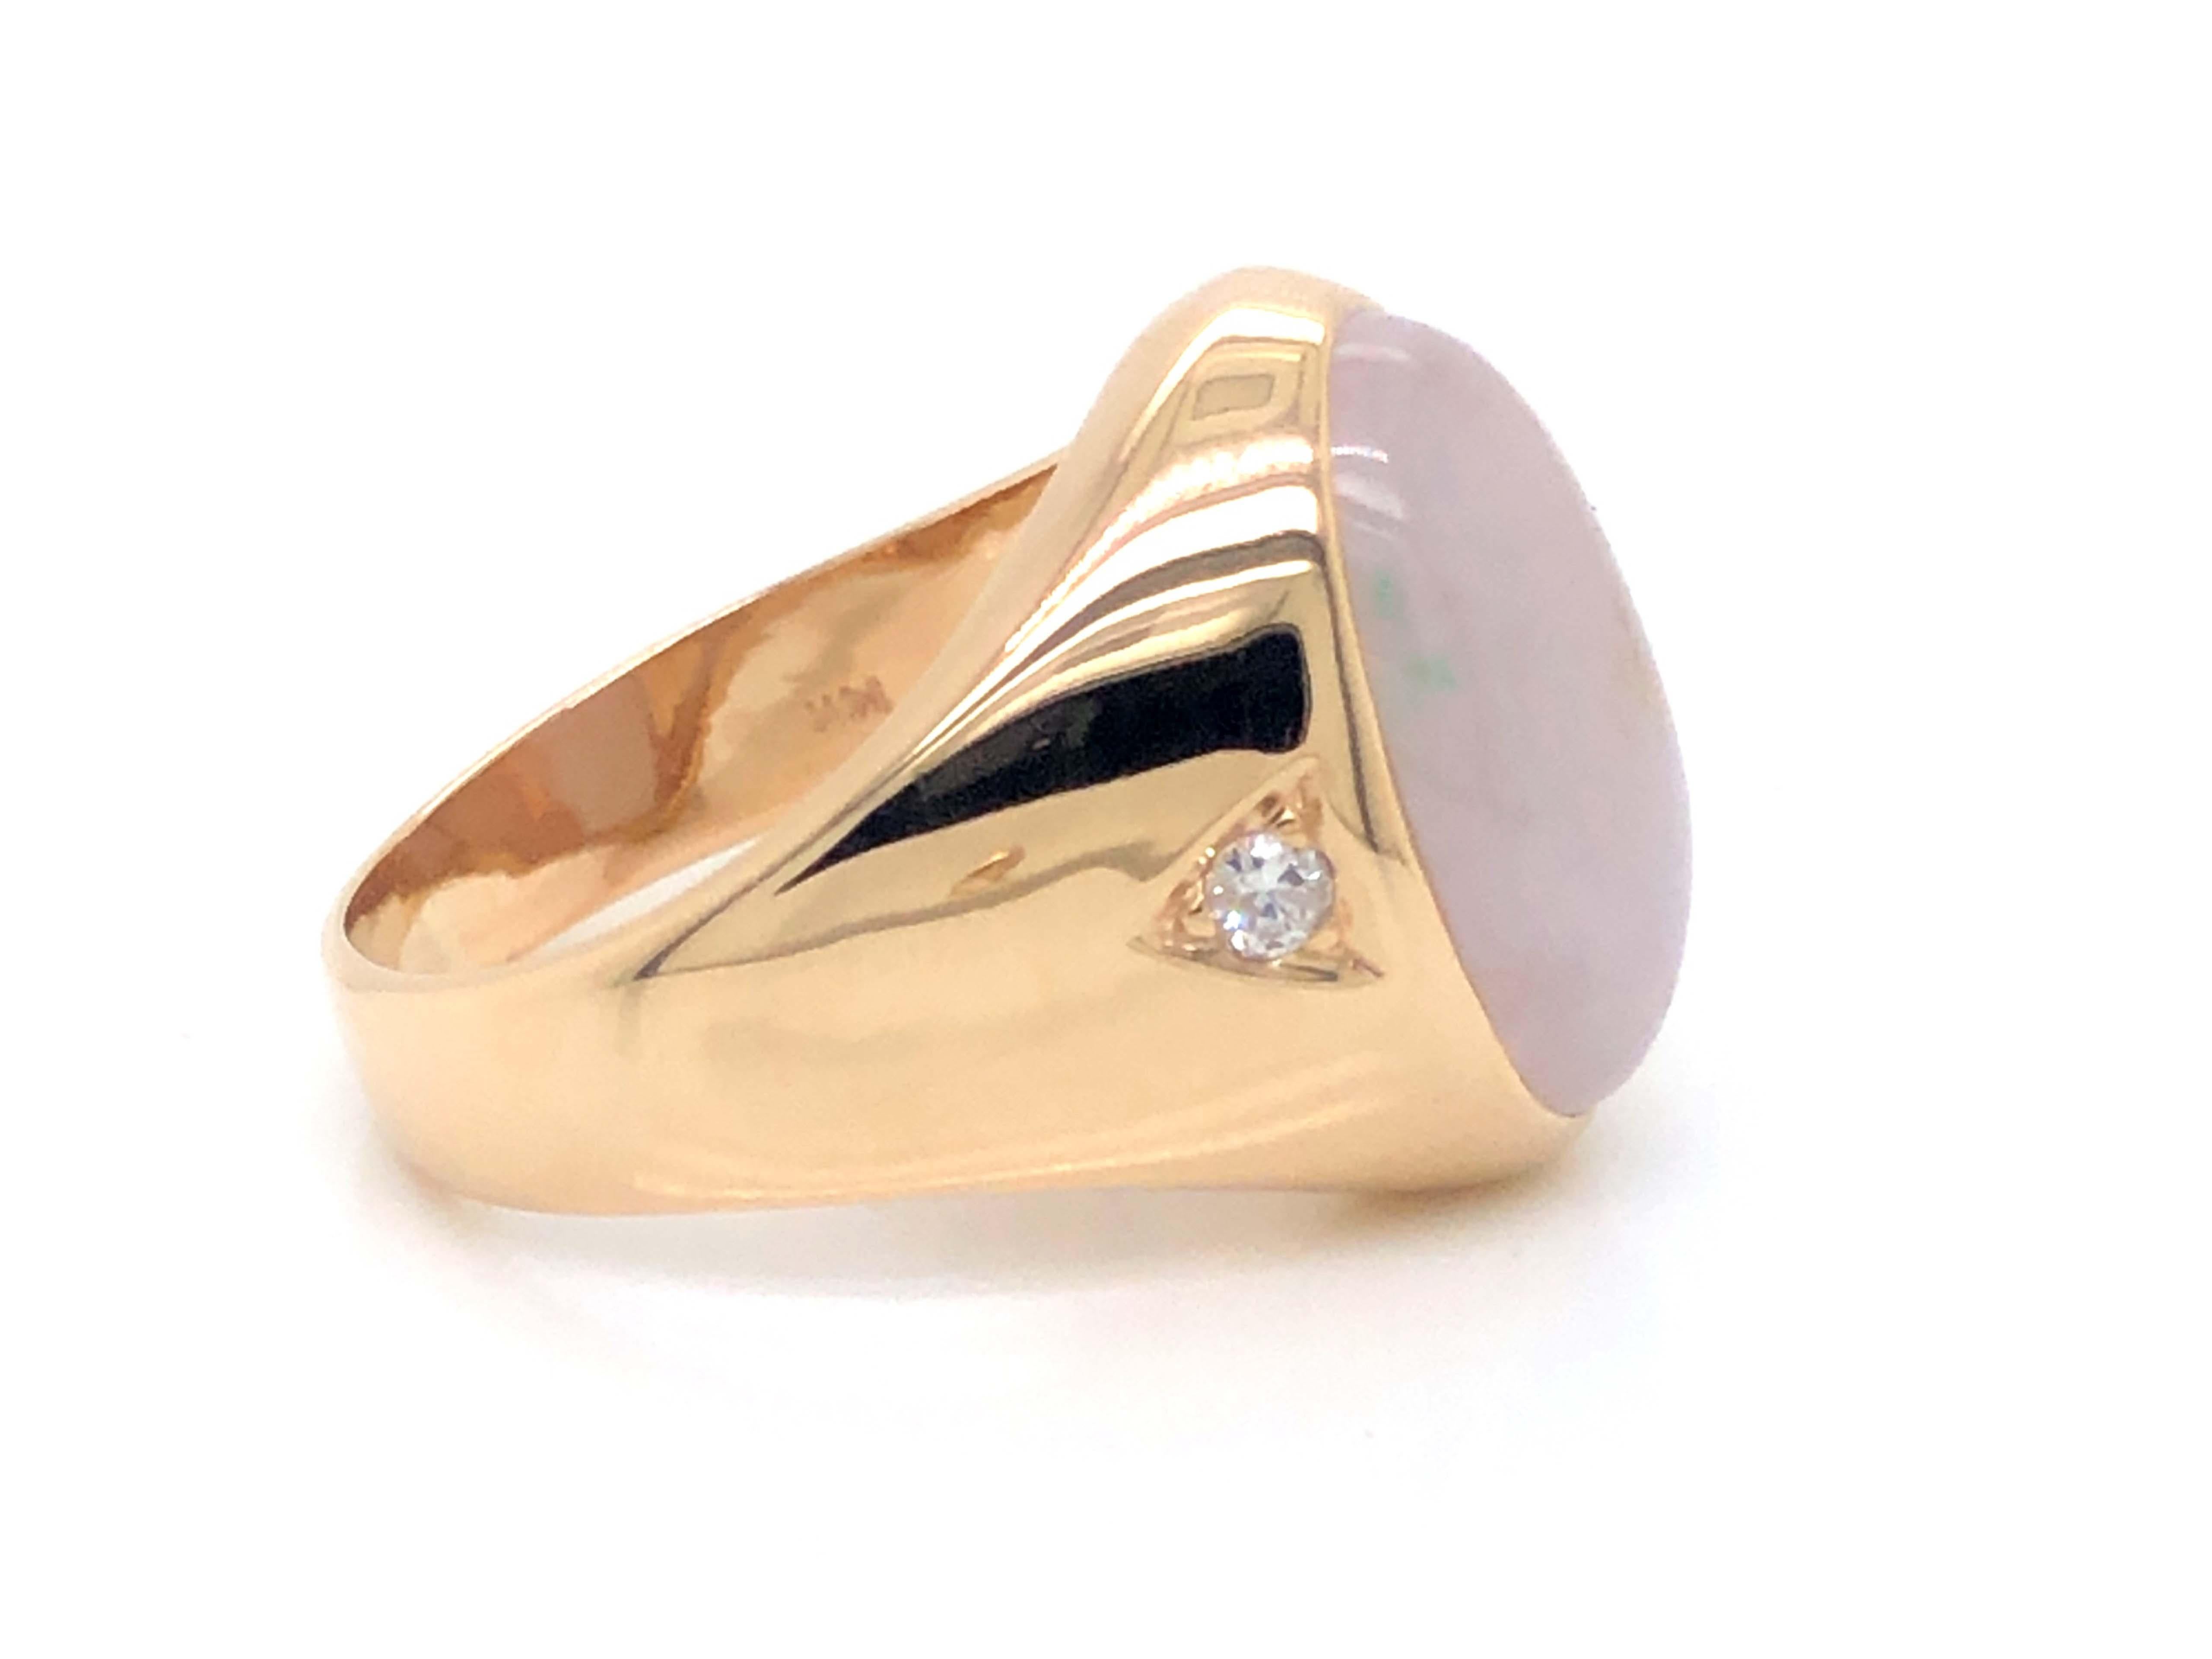 Men's Oval White Jade and Diamond Ring - 14k Yellow Gold In Excellent Condition For Sale In Honolulu, HI